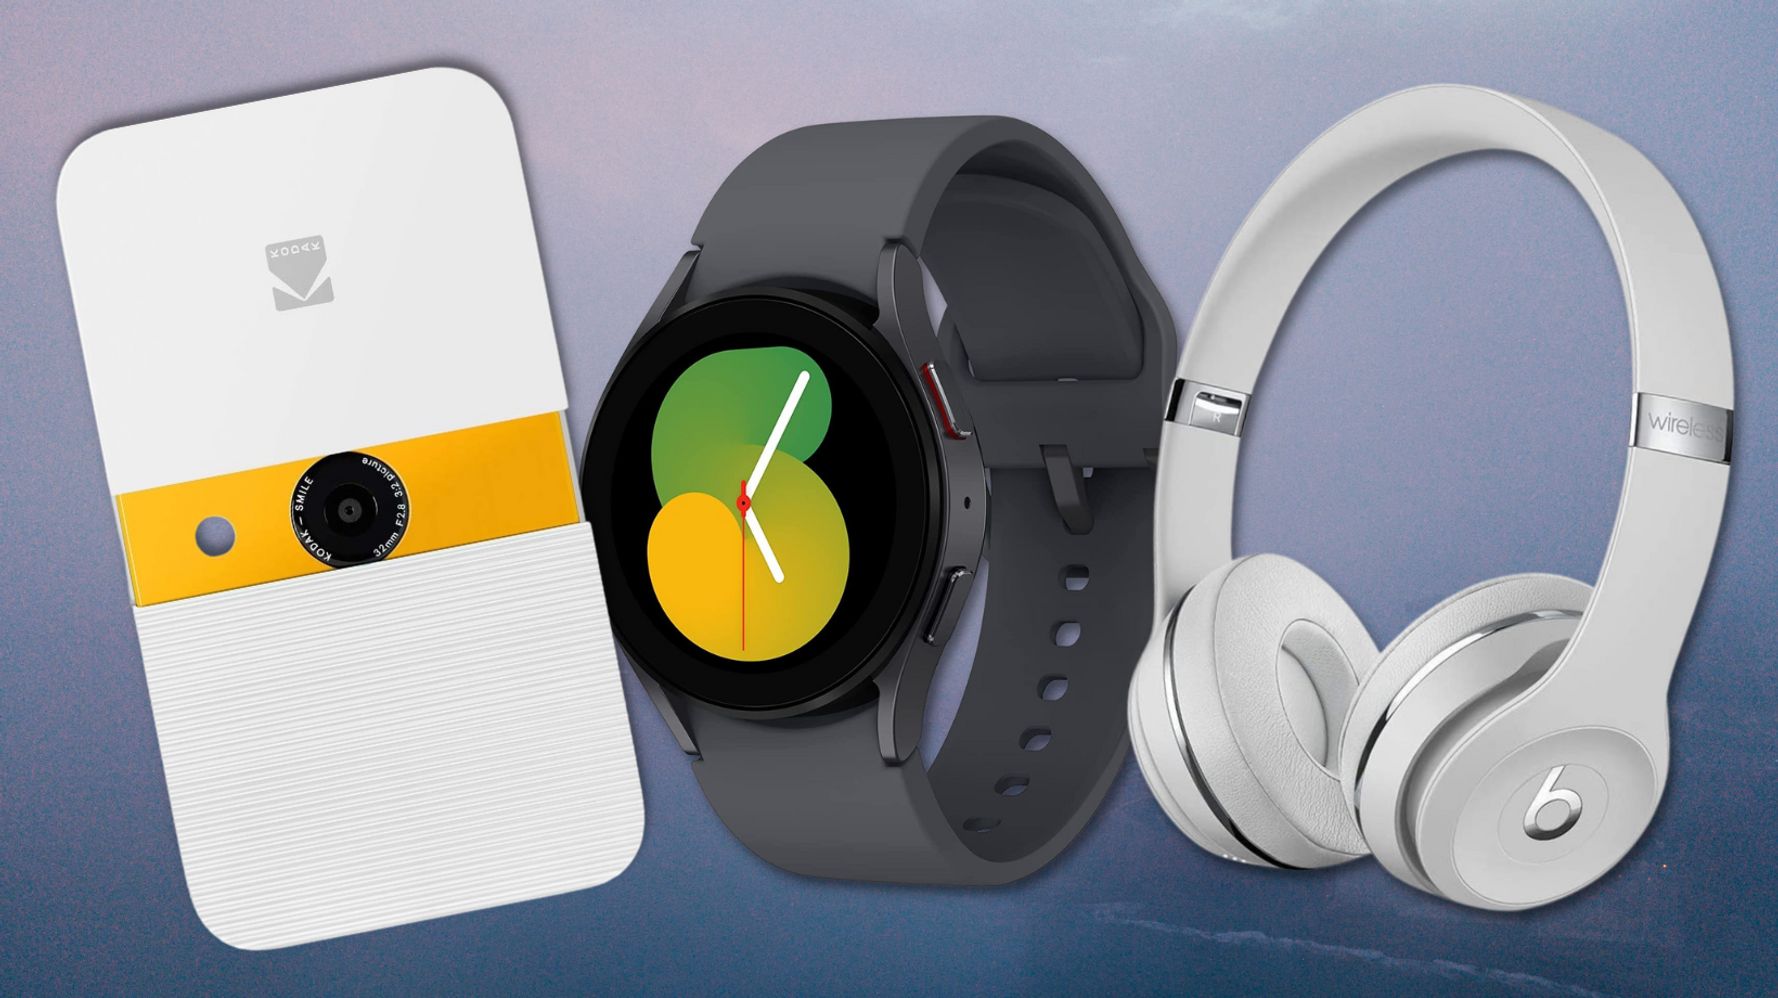 Tech gifts 2022: Top electronics and gadgets for your favorite